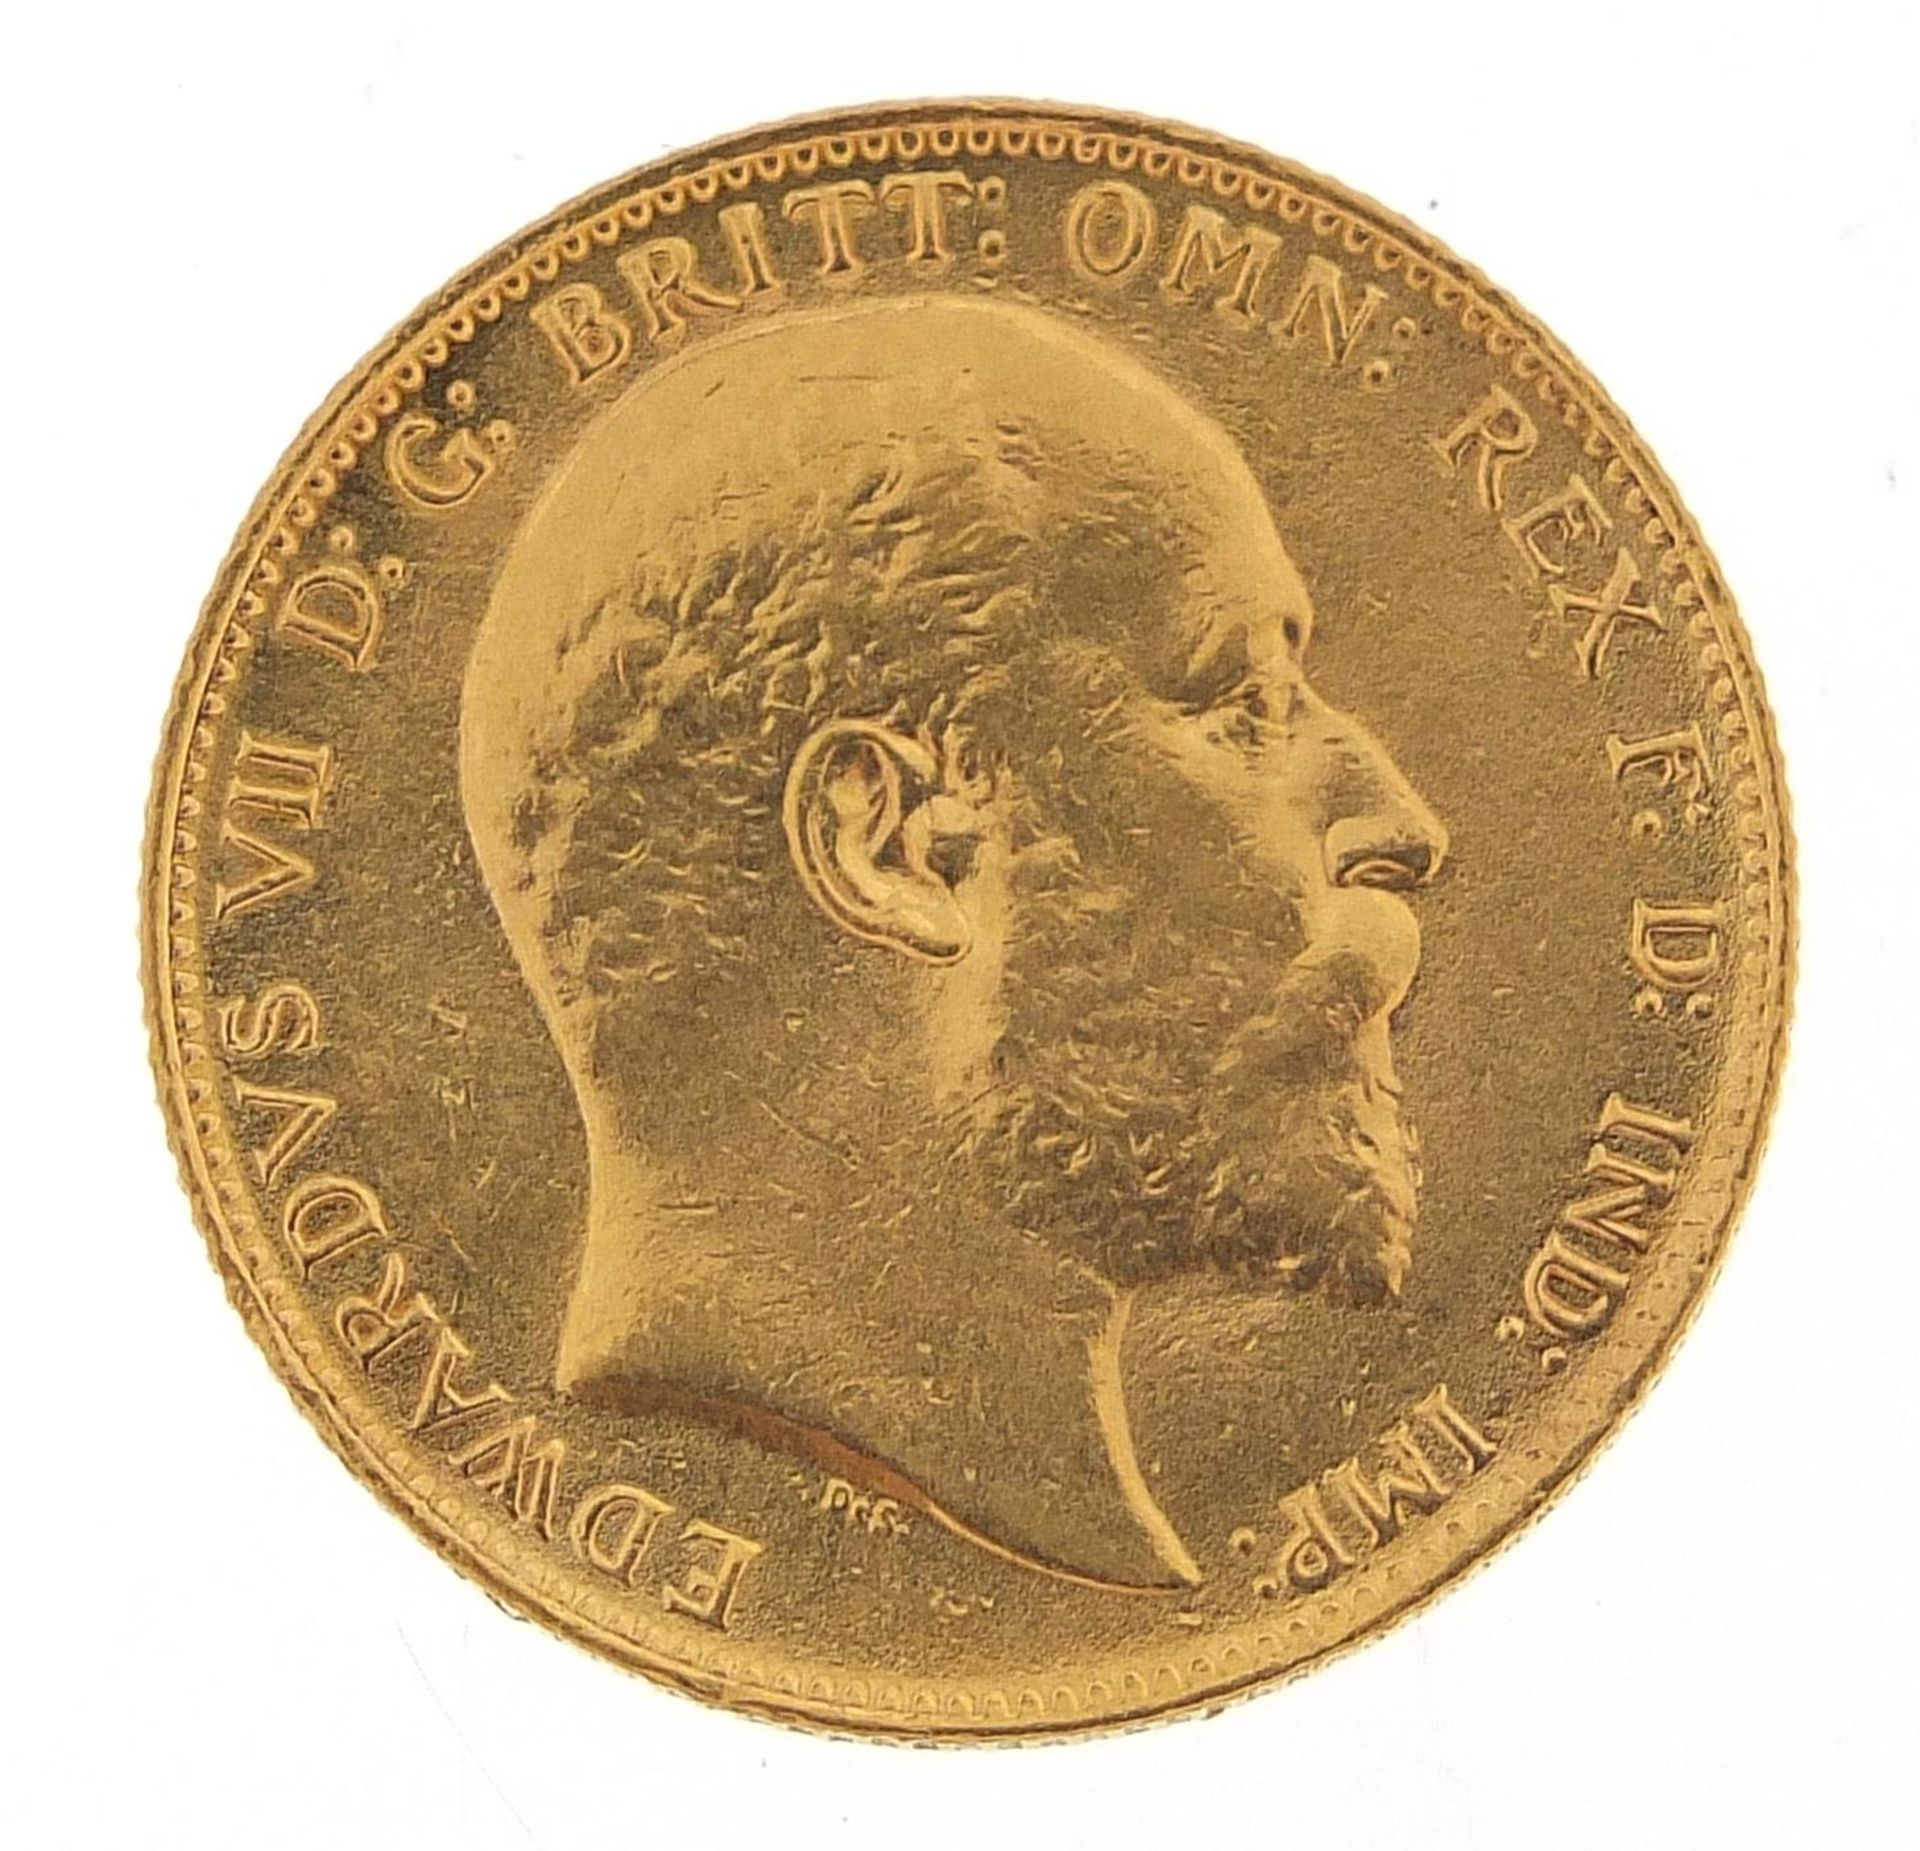 Edward VII 1902 gold sovereign, Perth mint - this lot is sold without buyer's premium - Image 2 of 3